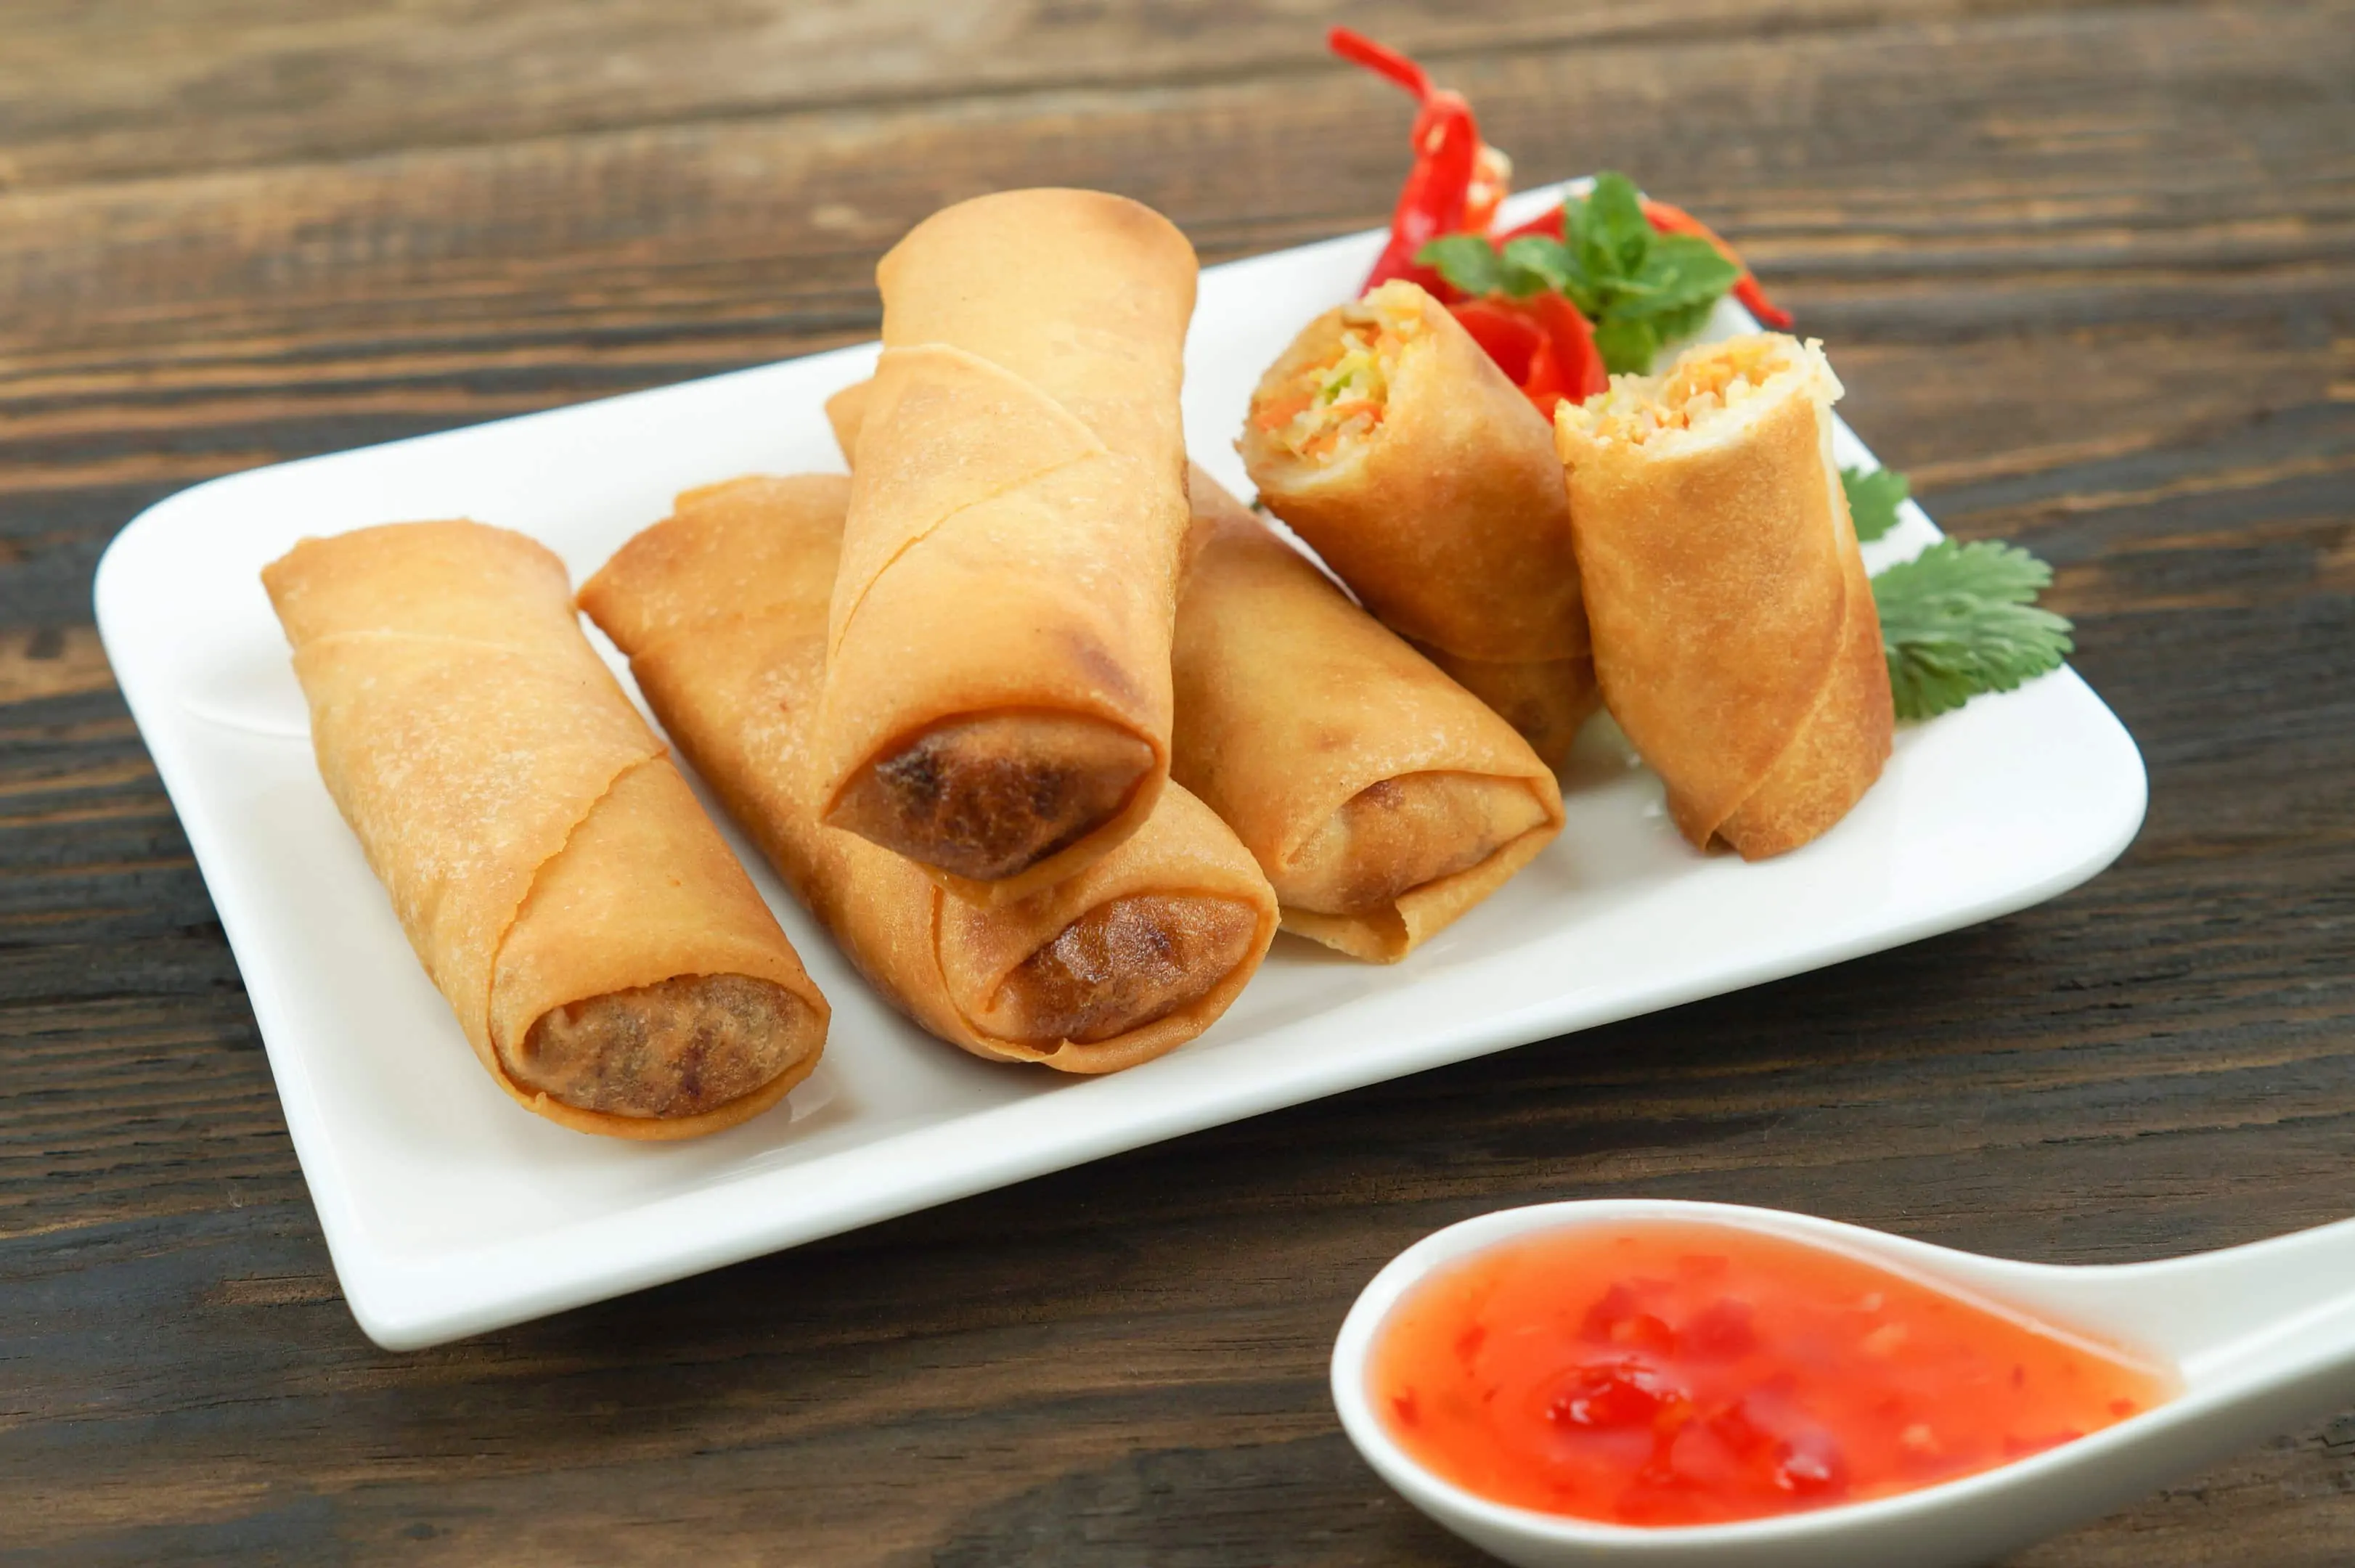 Fried lumpia isda recipe served with chili sauce